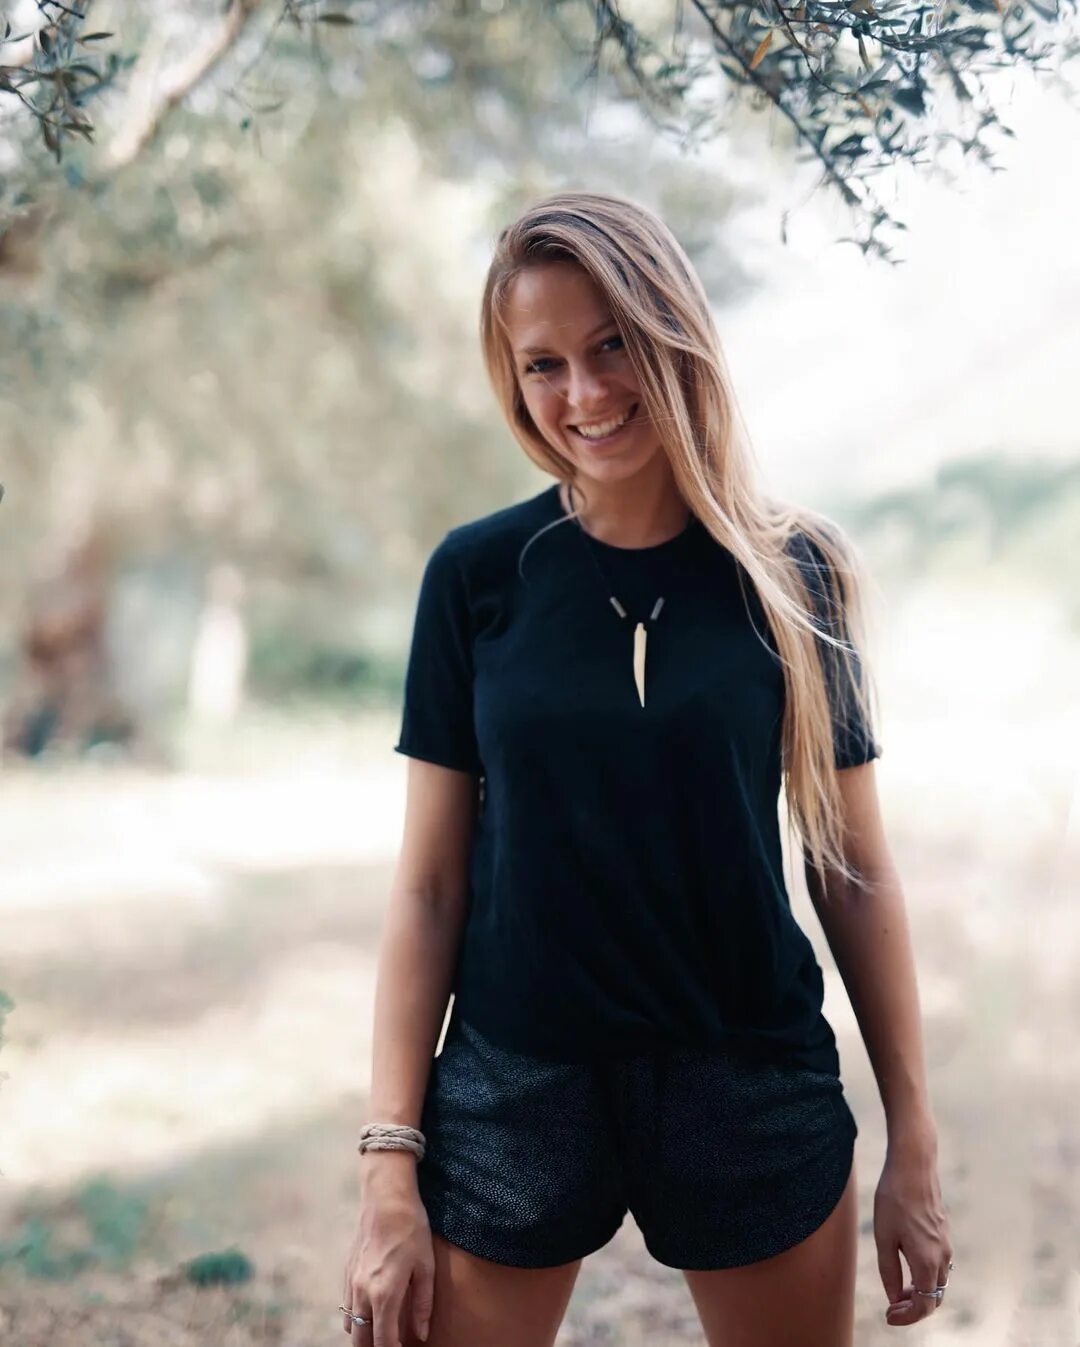 Nora En Pure в Instagram: "There were also some good moments this year...